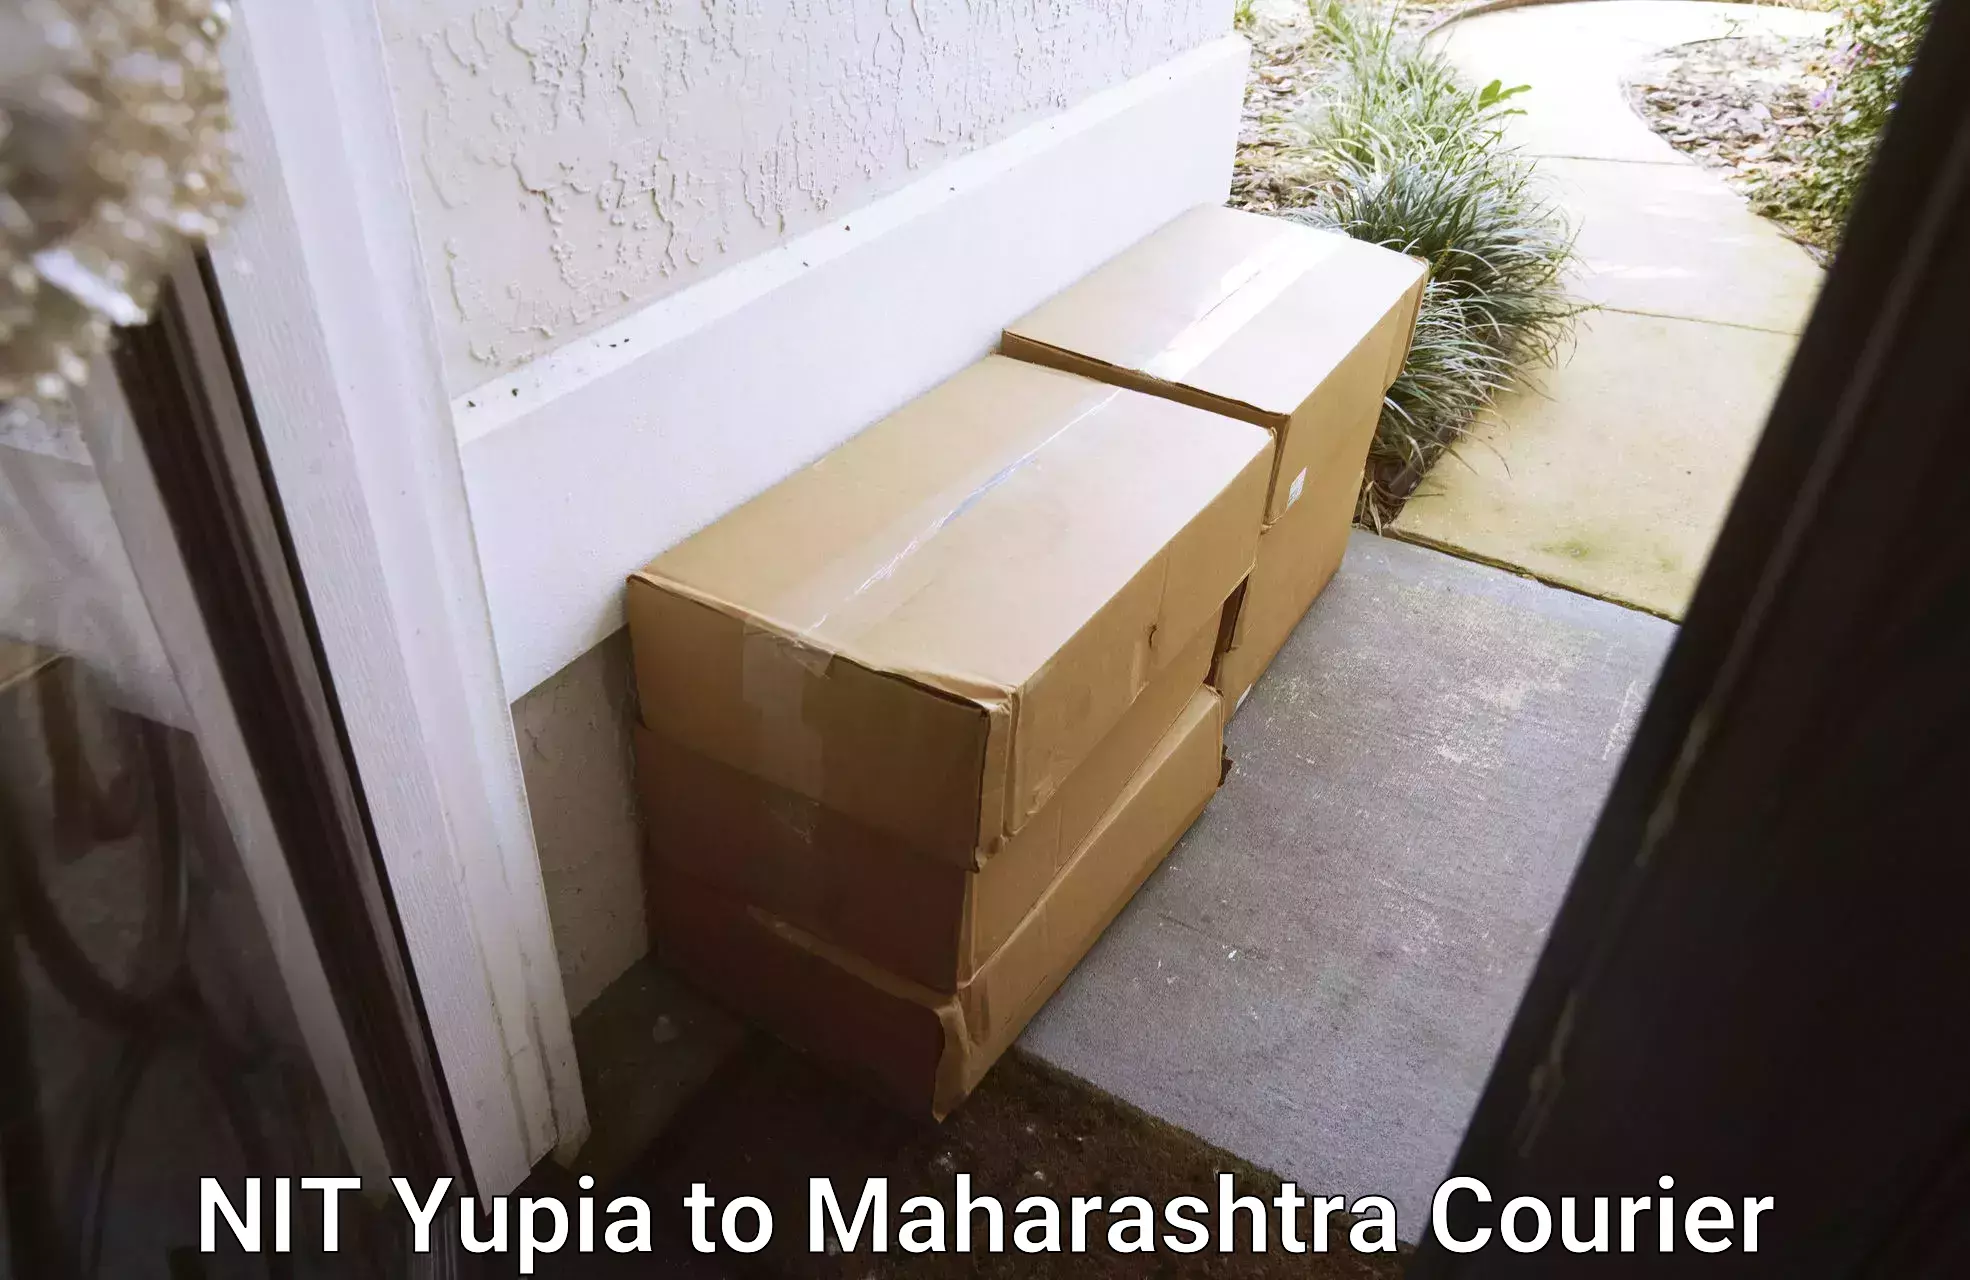 Custom courier packages in NIT Yupia to Ambegaon